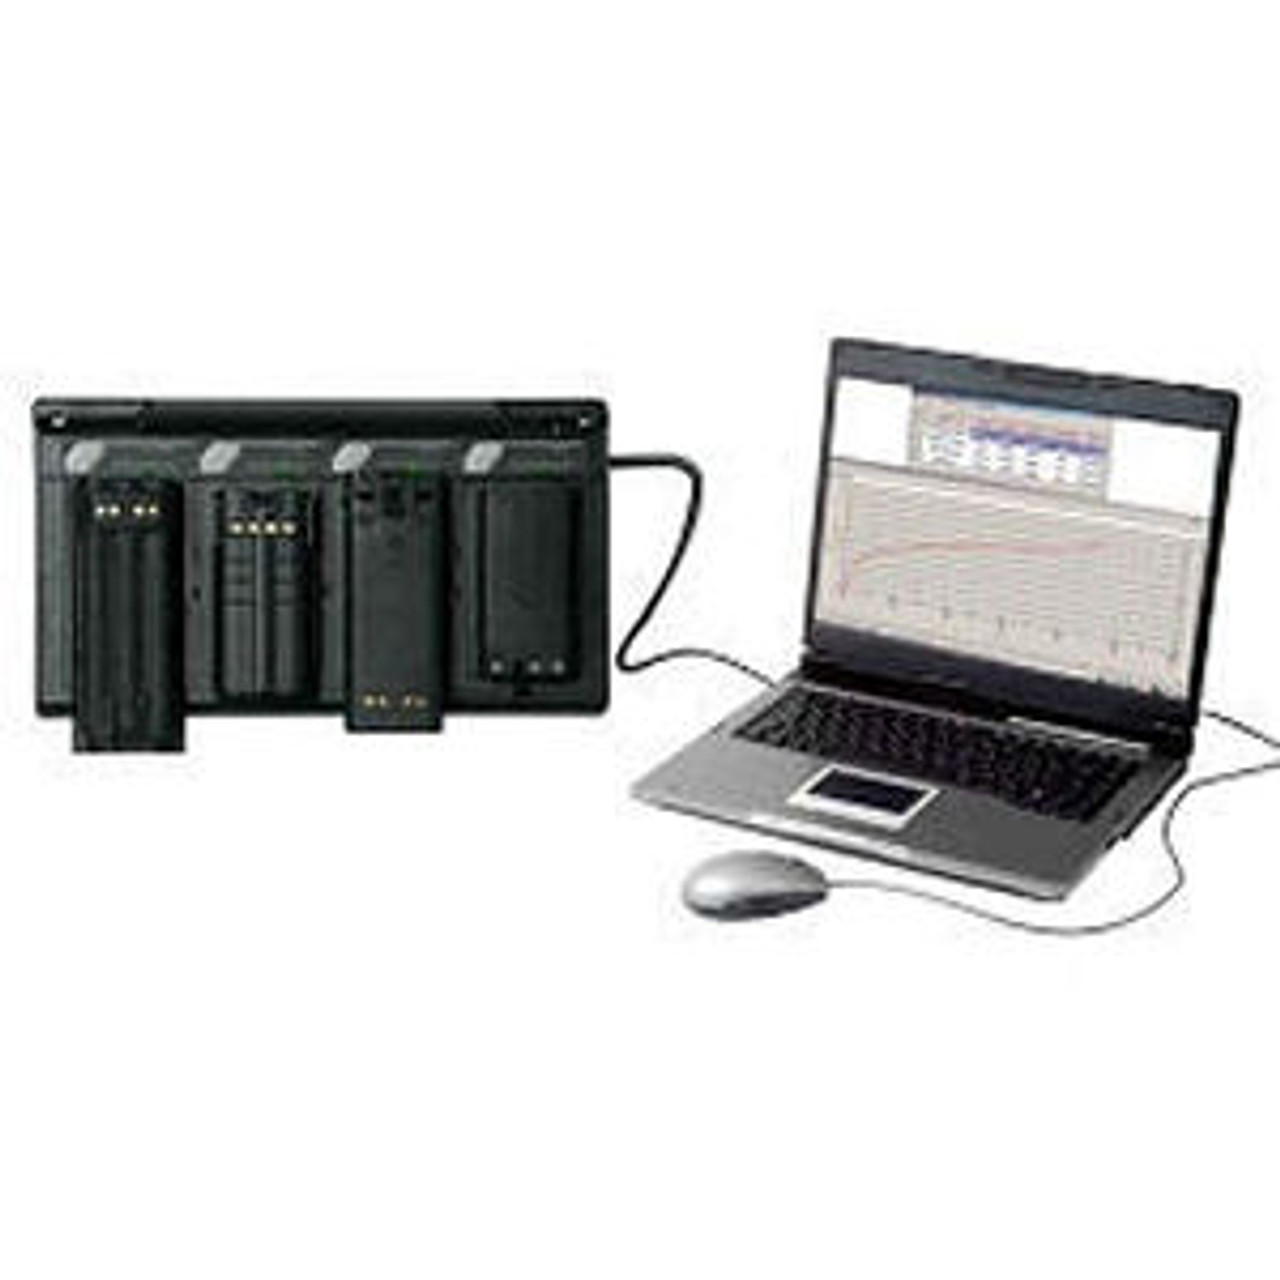 AdvanceTec 4-Slot Software Driven Monitoring System For Relm RPV3600 Batteries